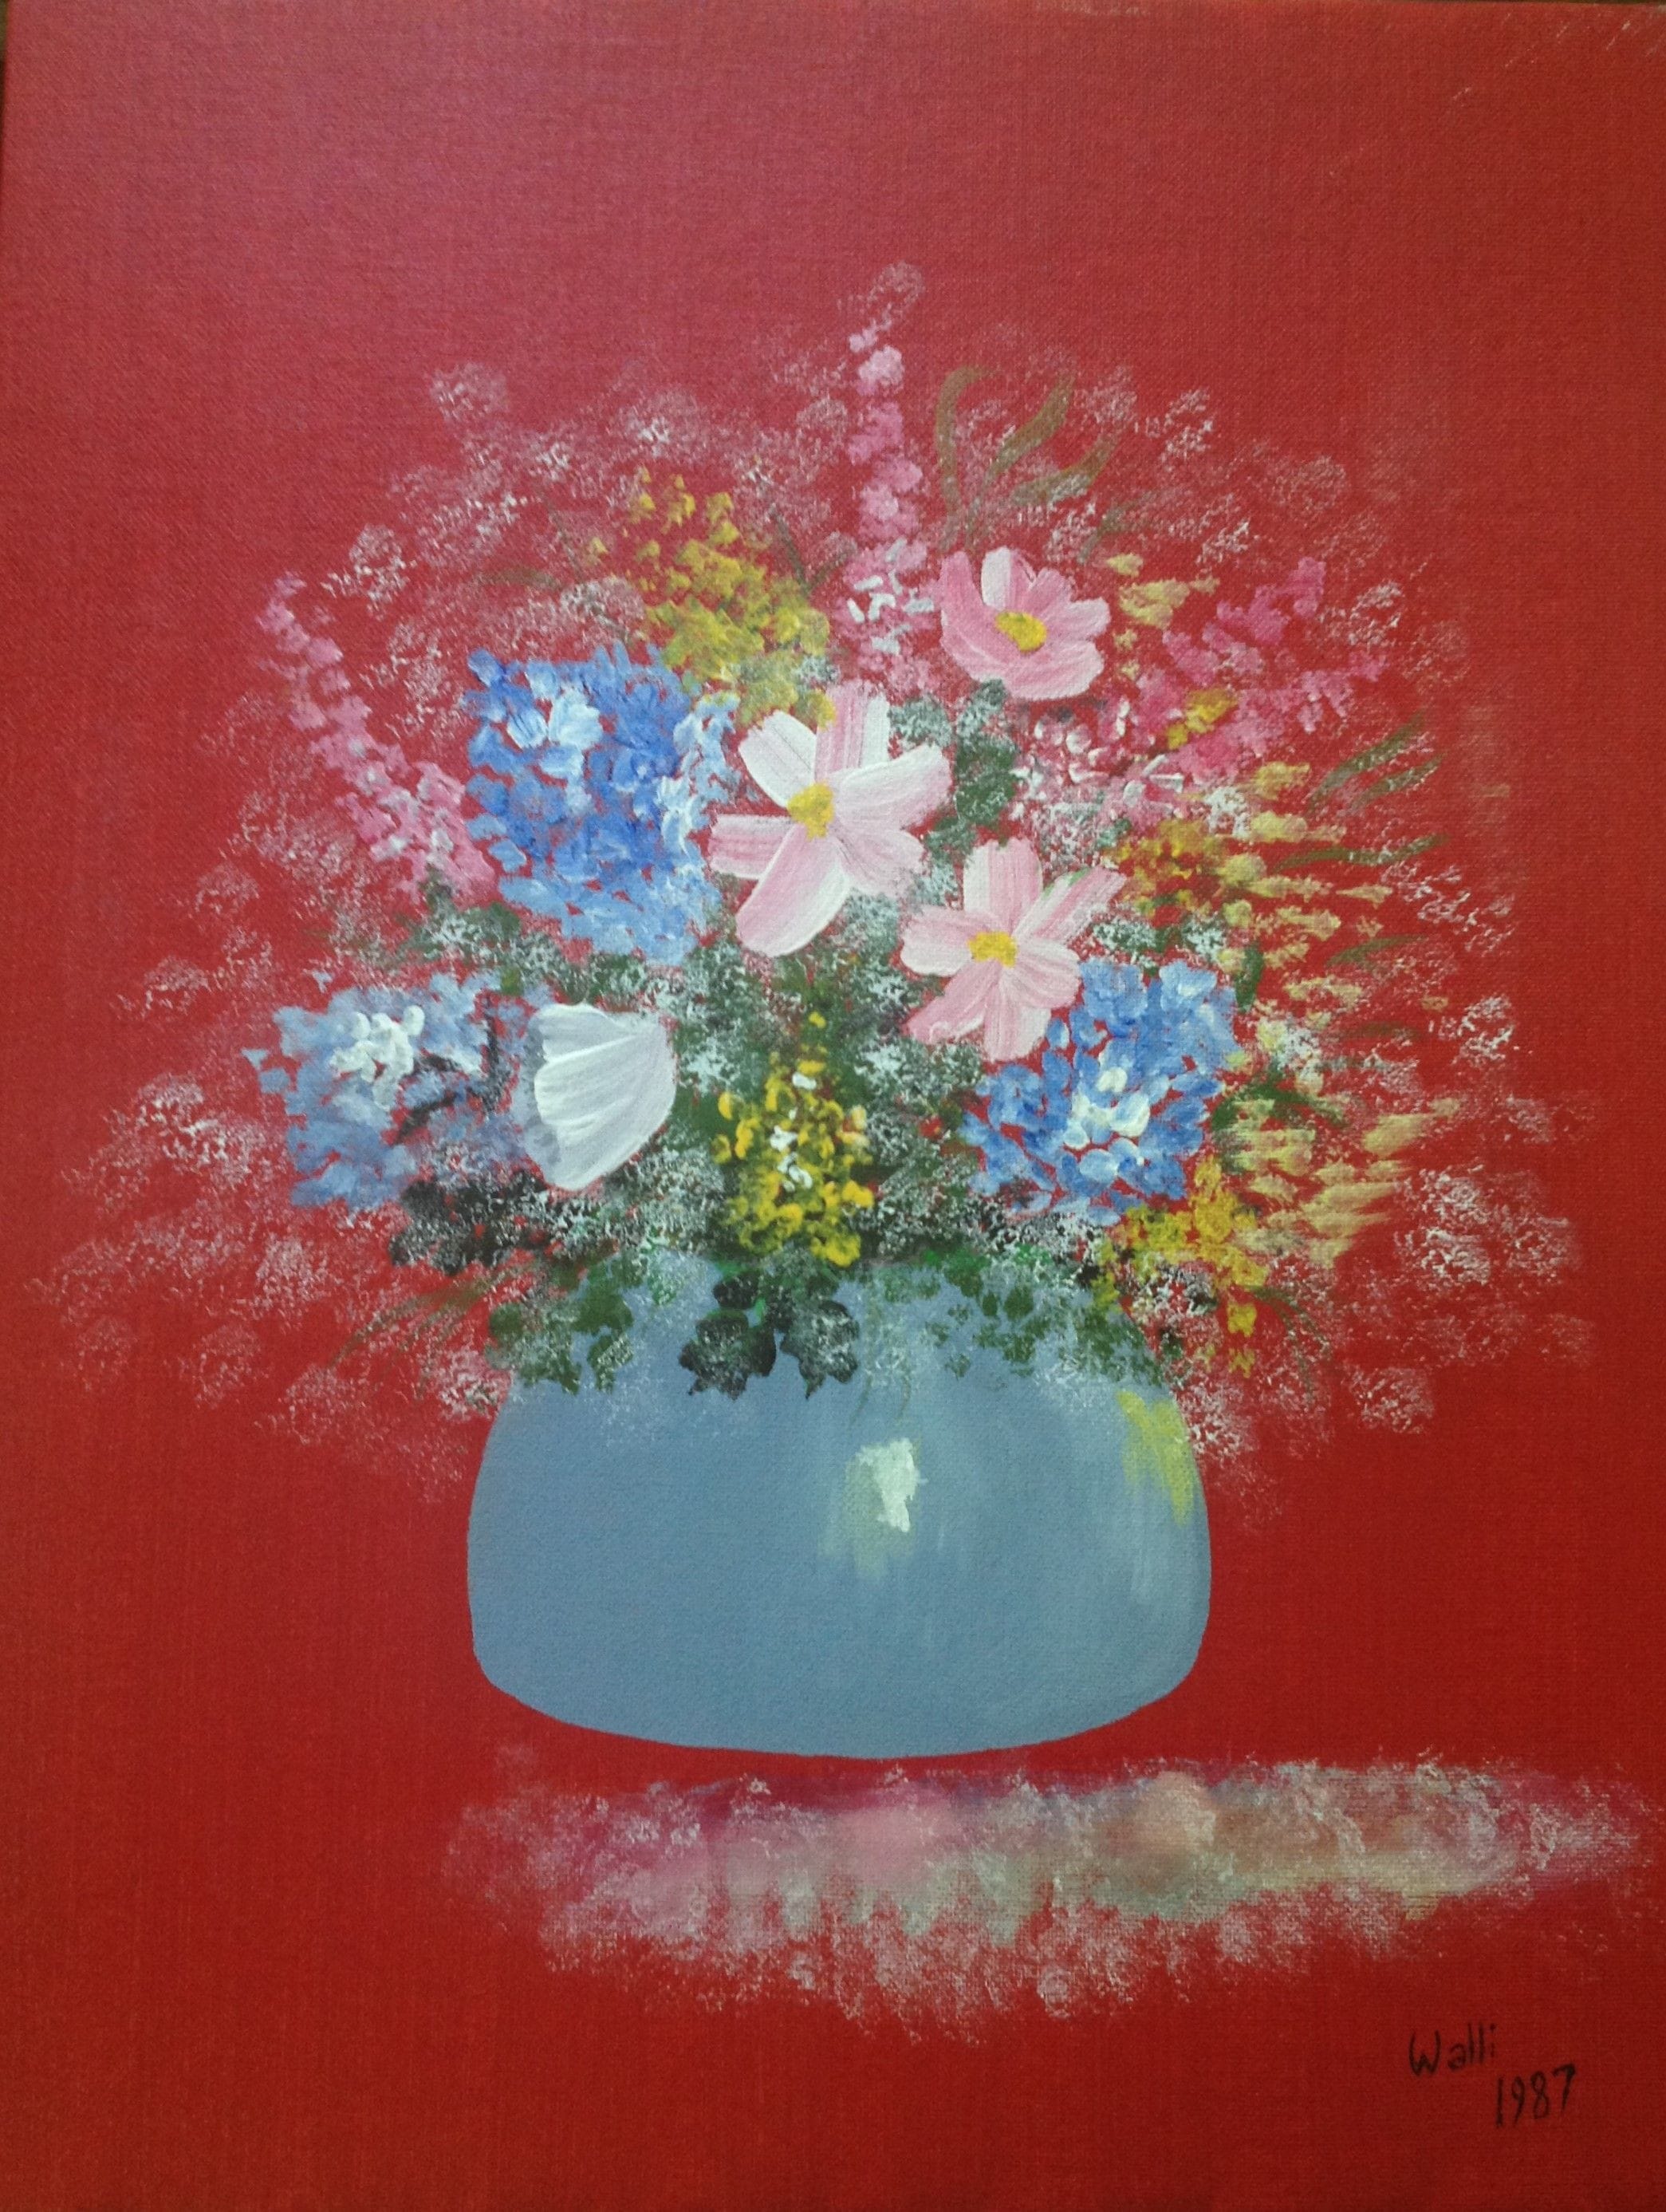 Flowers on Red, 1987
Acrylic on Canvas Board
14"W x 18"H, Walli White, artist